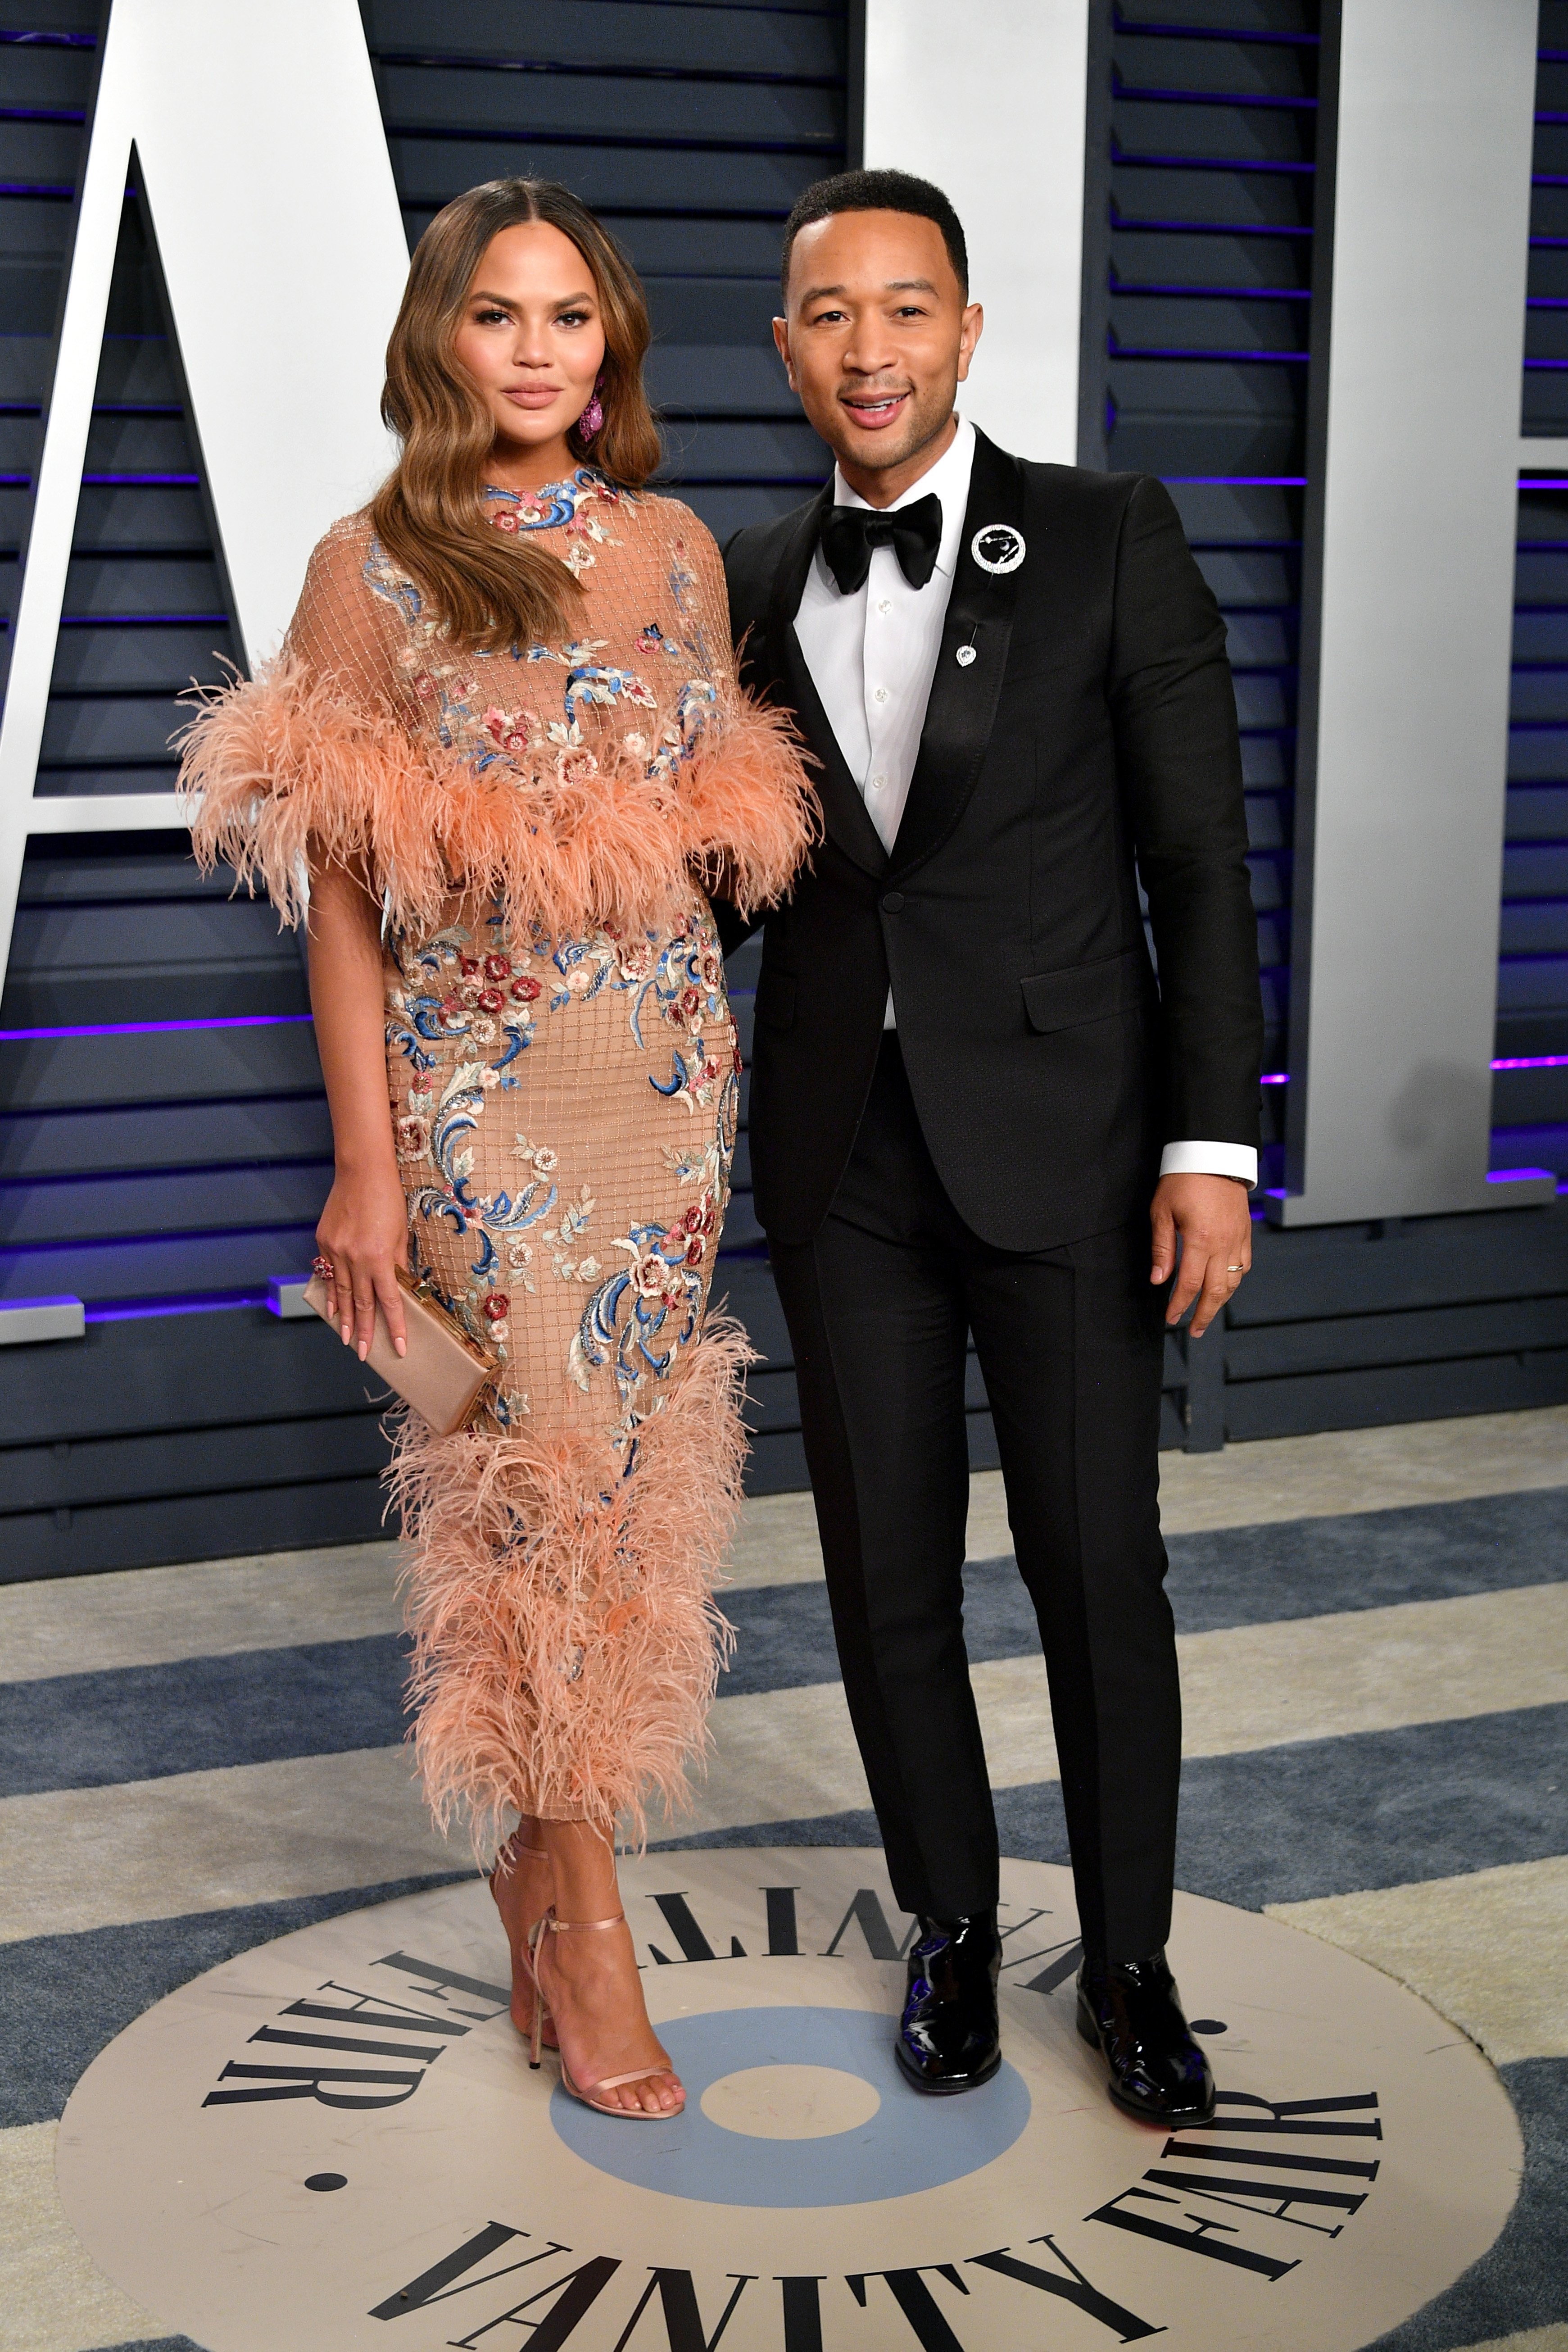 Chrissy Teigen and John Legend attend the Vanity Fair Oscar Party in Beverly Hills, California on February 24, 2019 | Photo: Getty Images